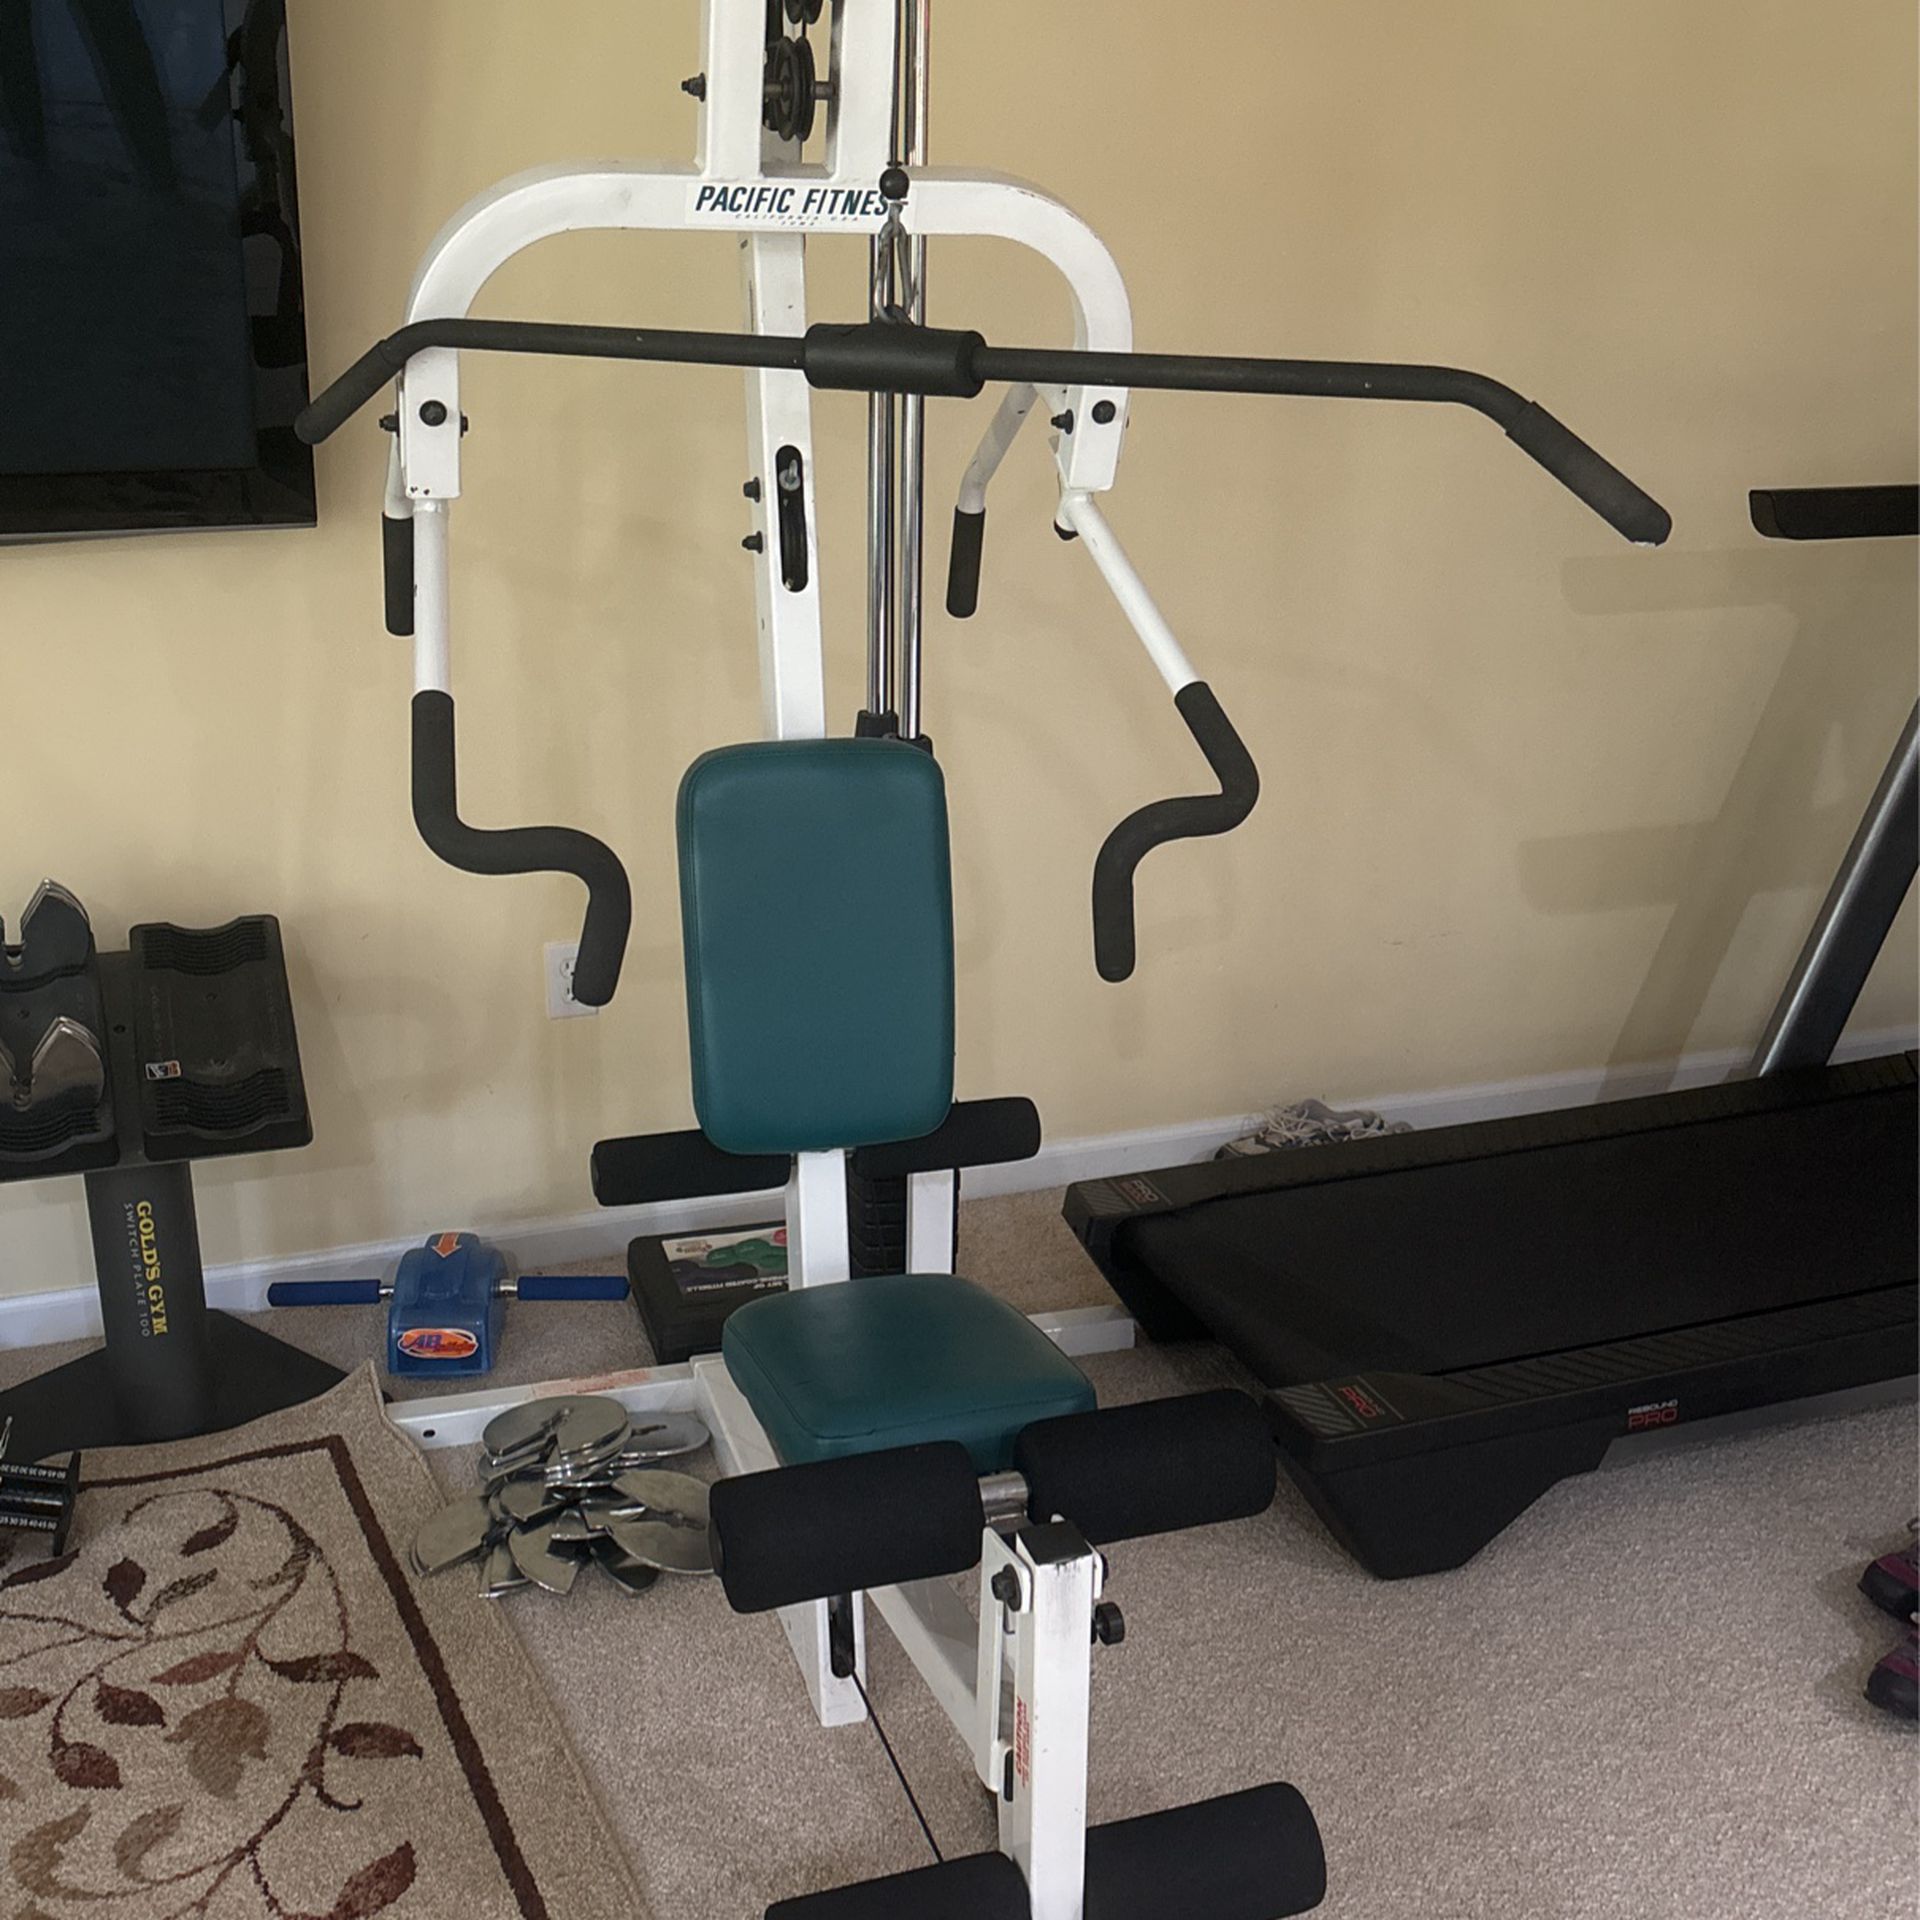 Pacific Fitness Full Body Workout Machine 